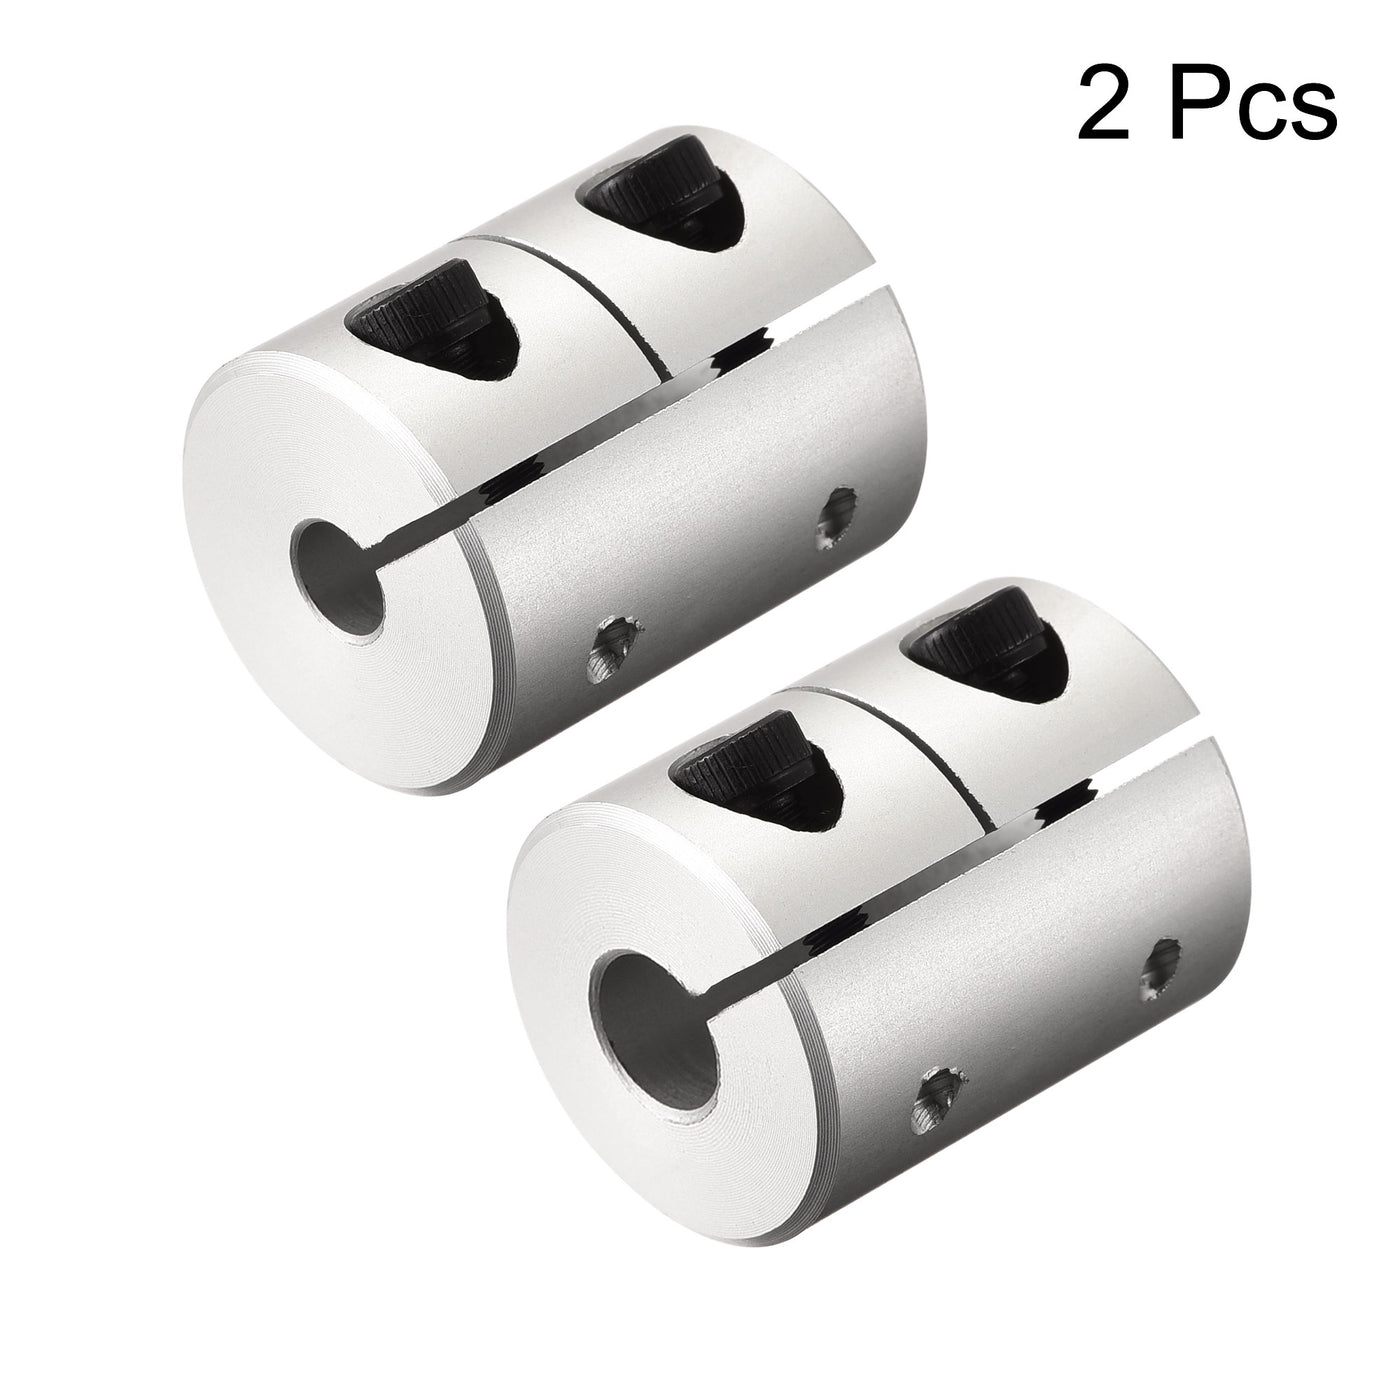 uxcell Uxcell 2pcs 4mm to 6mm Shaft Coupling 25mmx20mm Coupler Aluminum Alloy Joint Motor for 3D Printer CNC Machine DIY Encoder